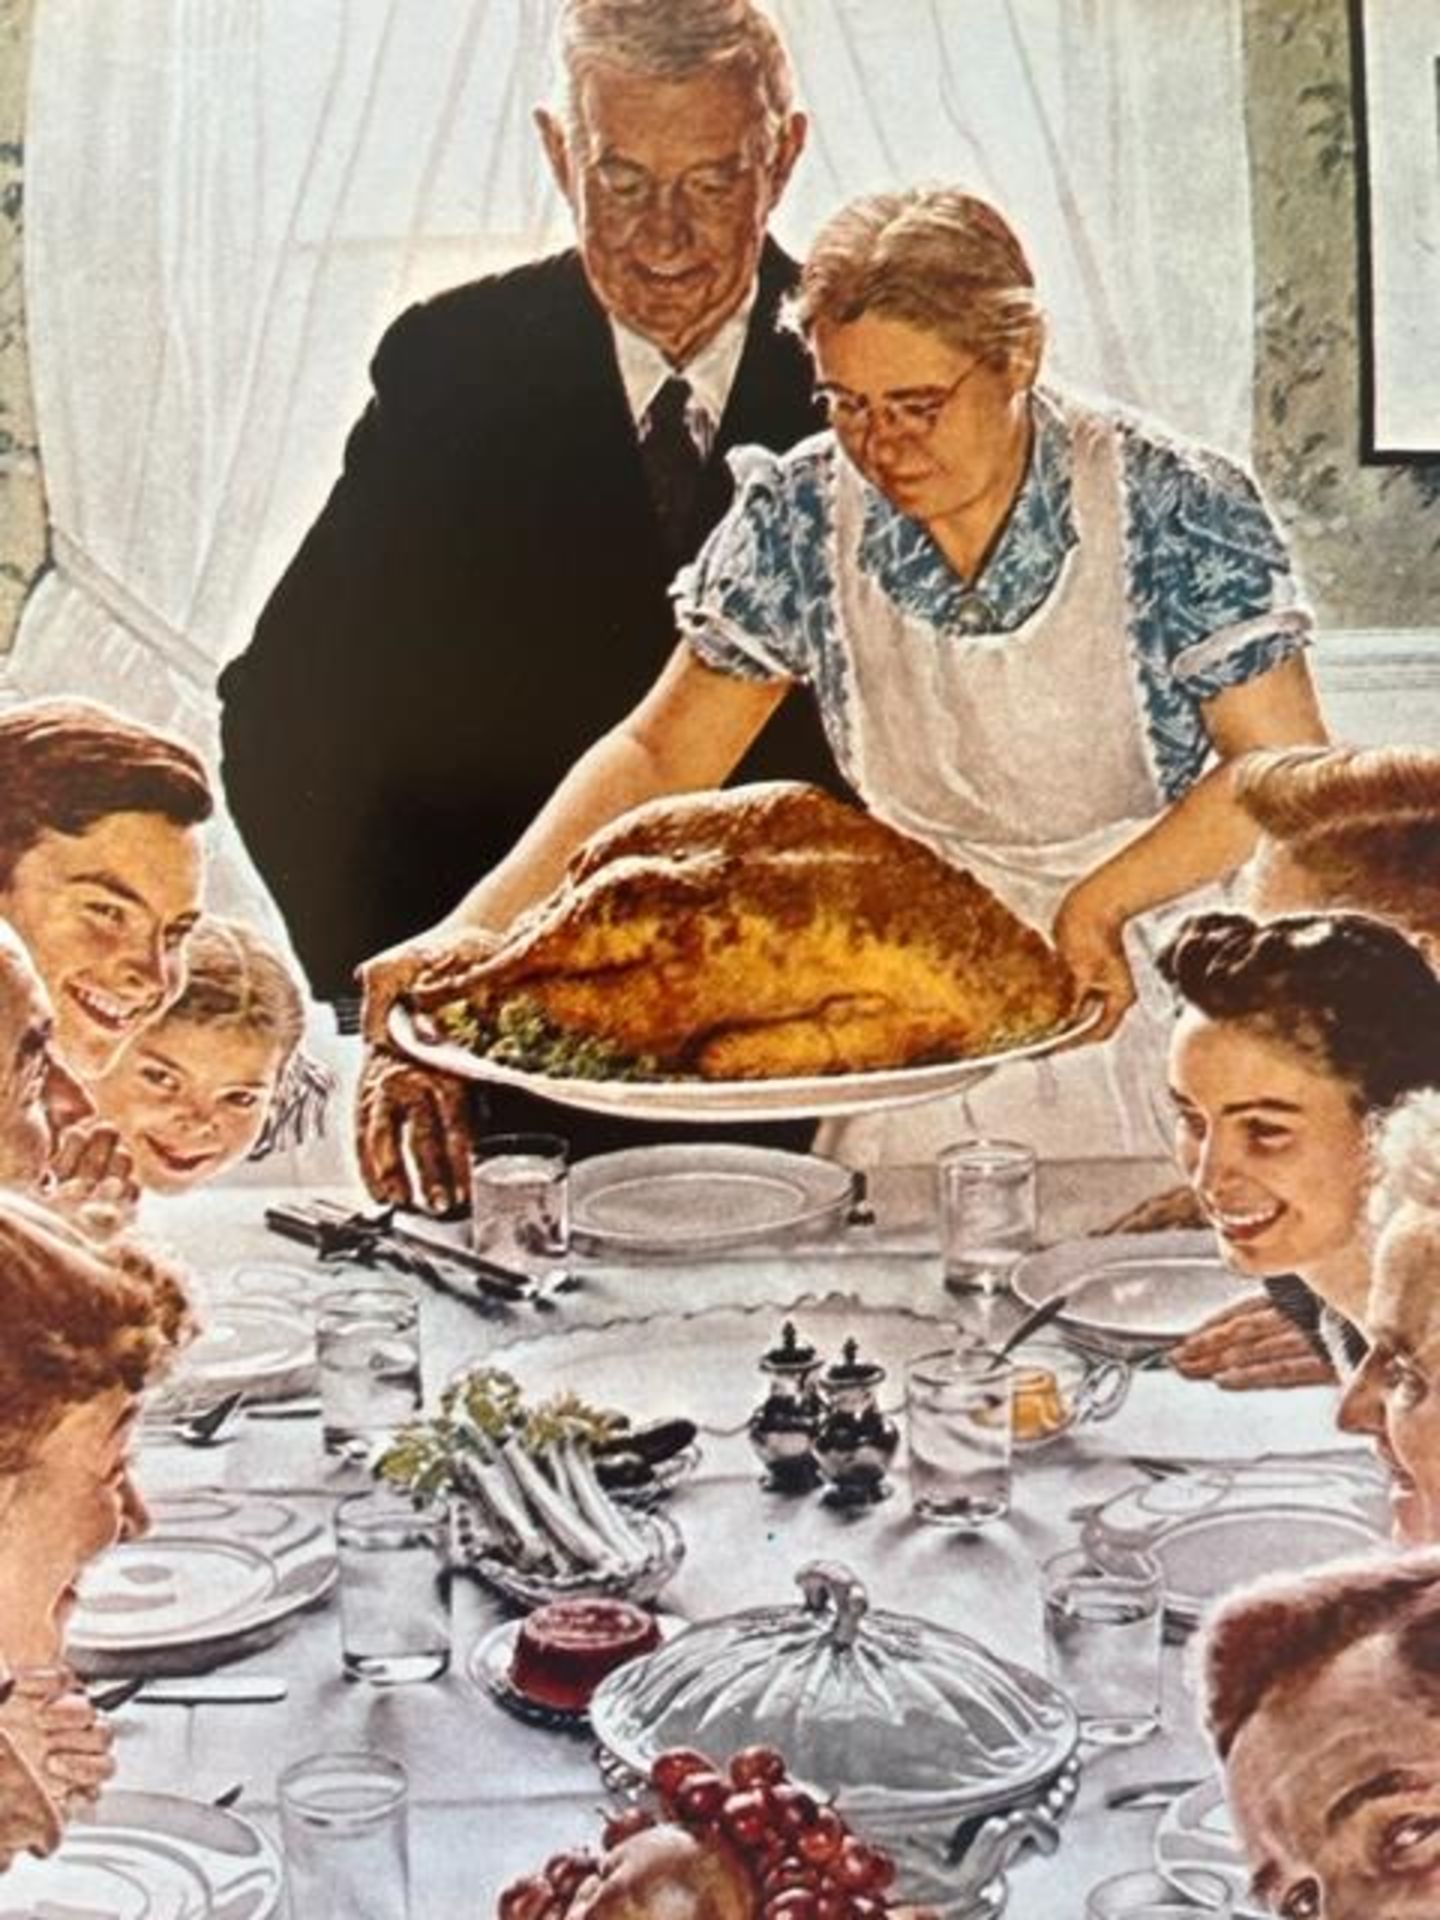 Norman Rockwell "Freedom from Want" Print.